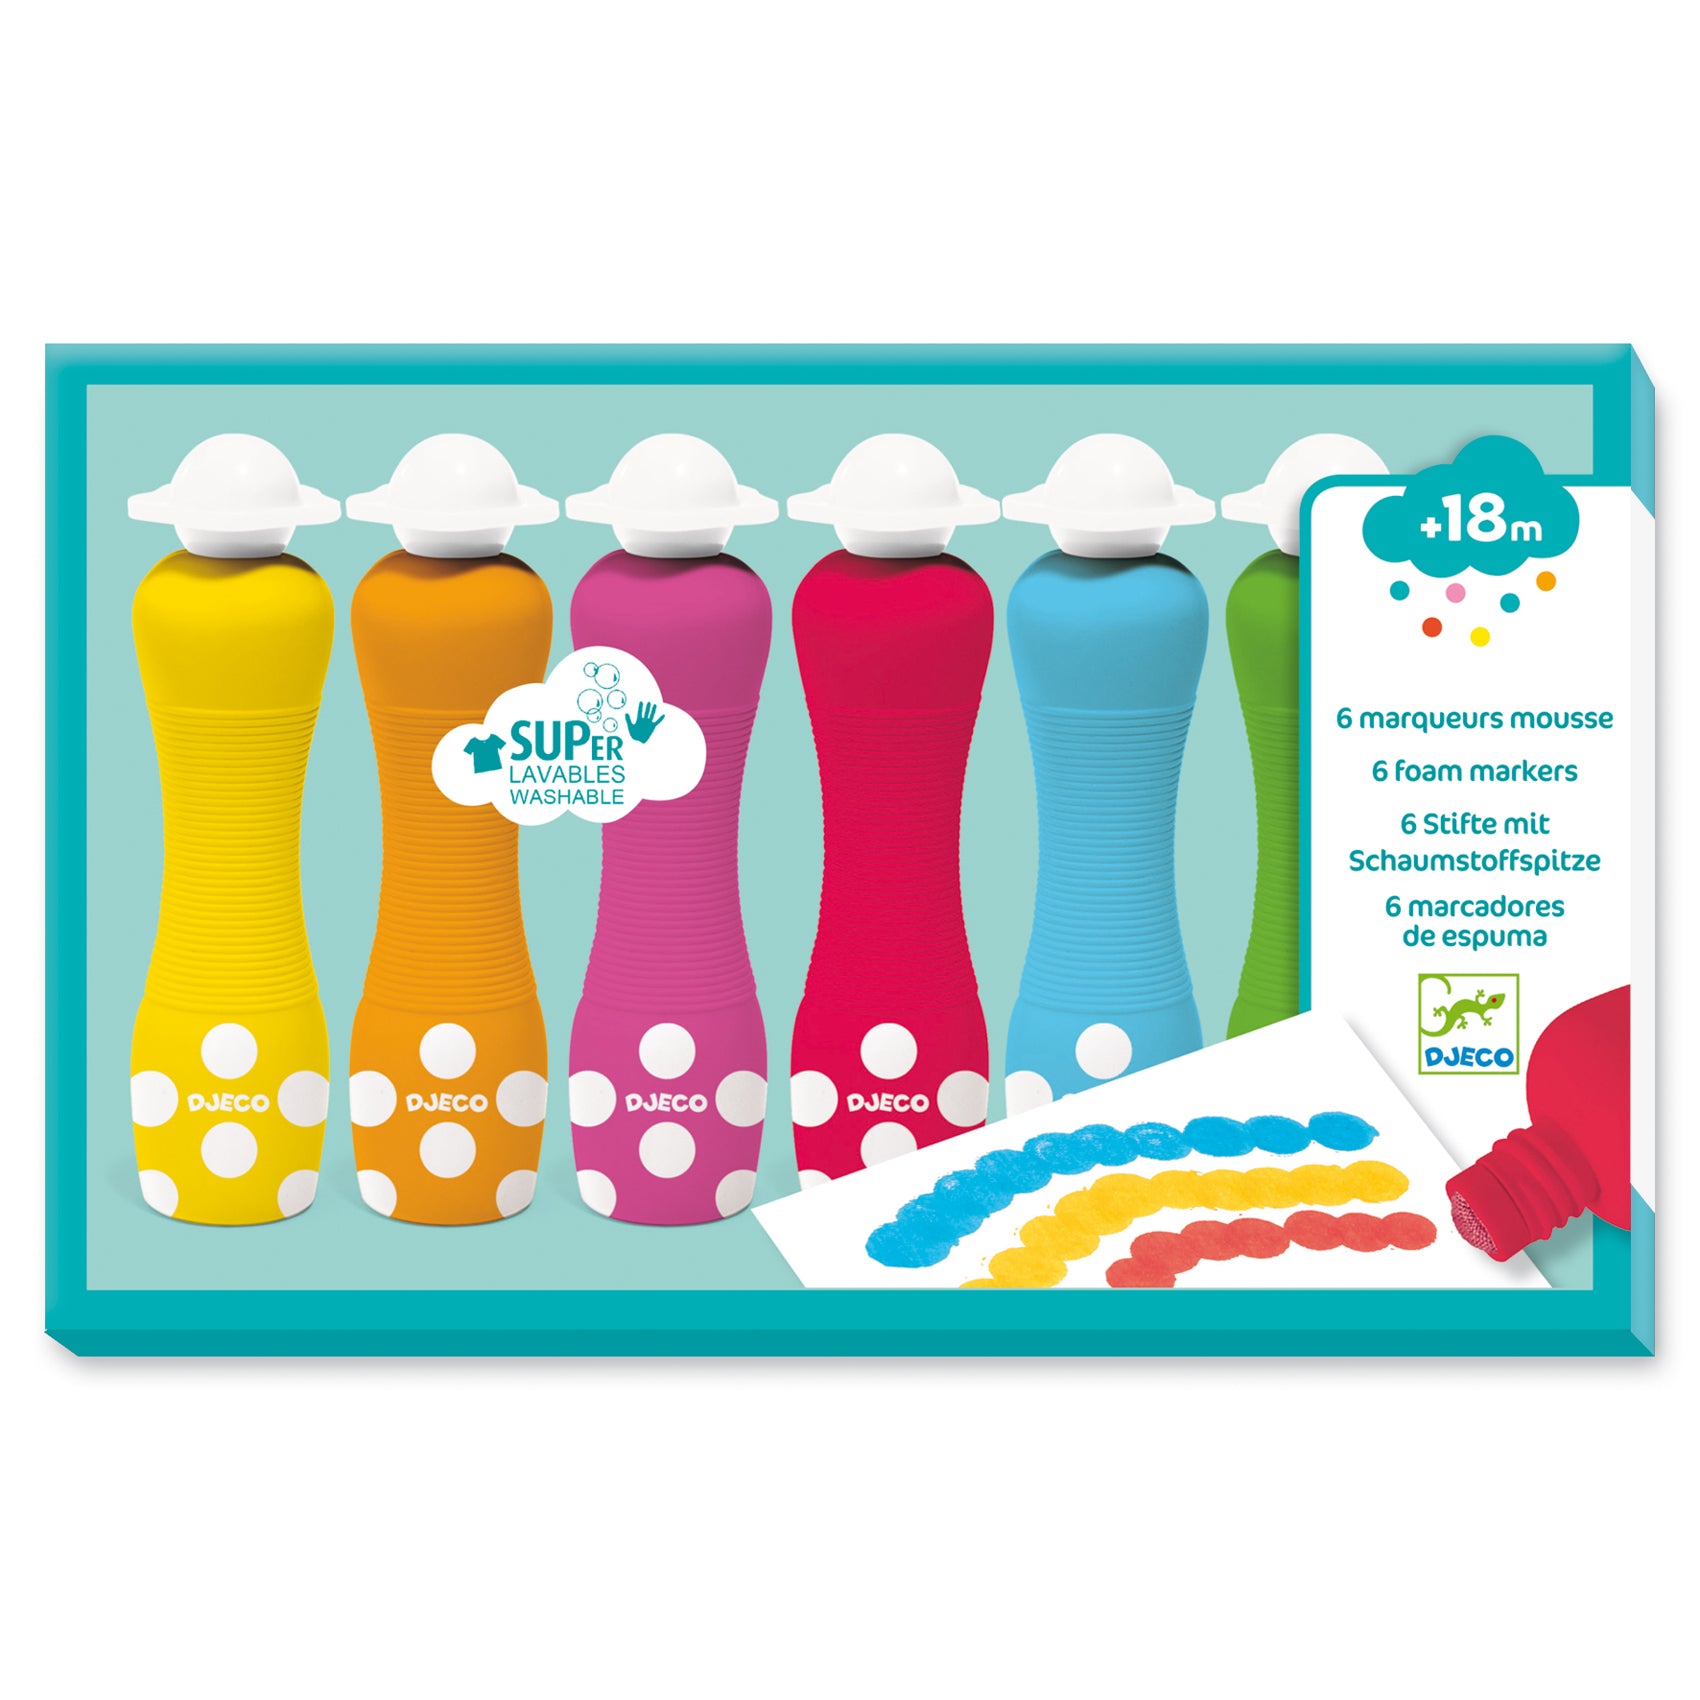 Djeco Washable Foam Markers for Little Ones – Set of 6